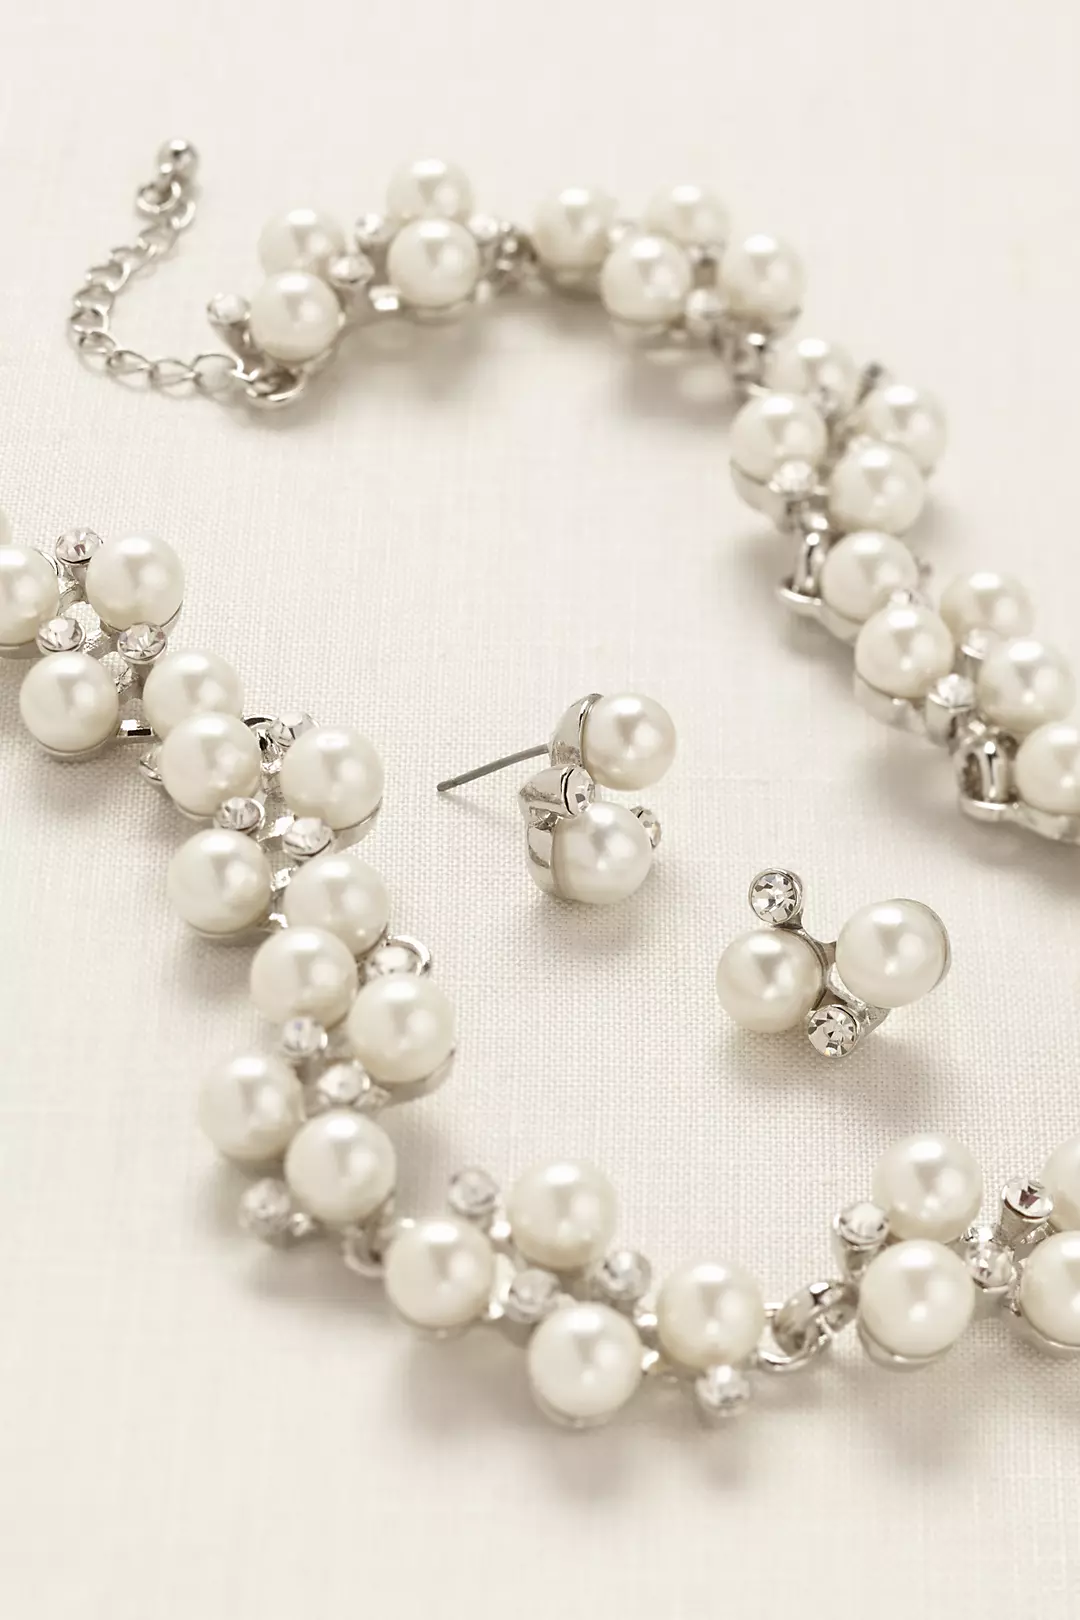 Pearl Rhinestone Vine Necklace and Earring Set Image